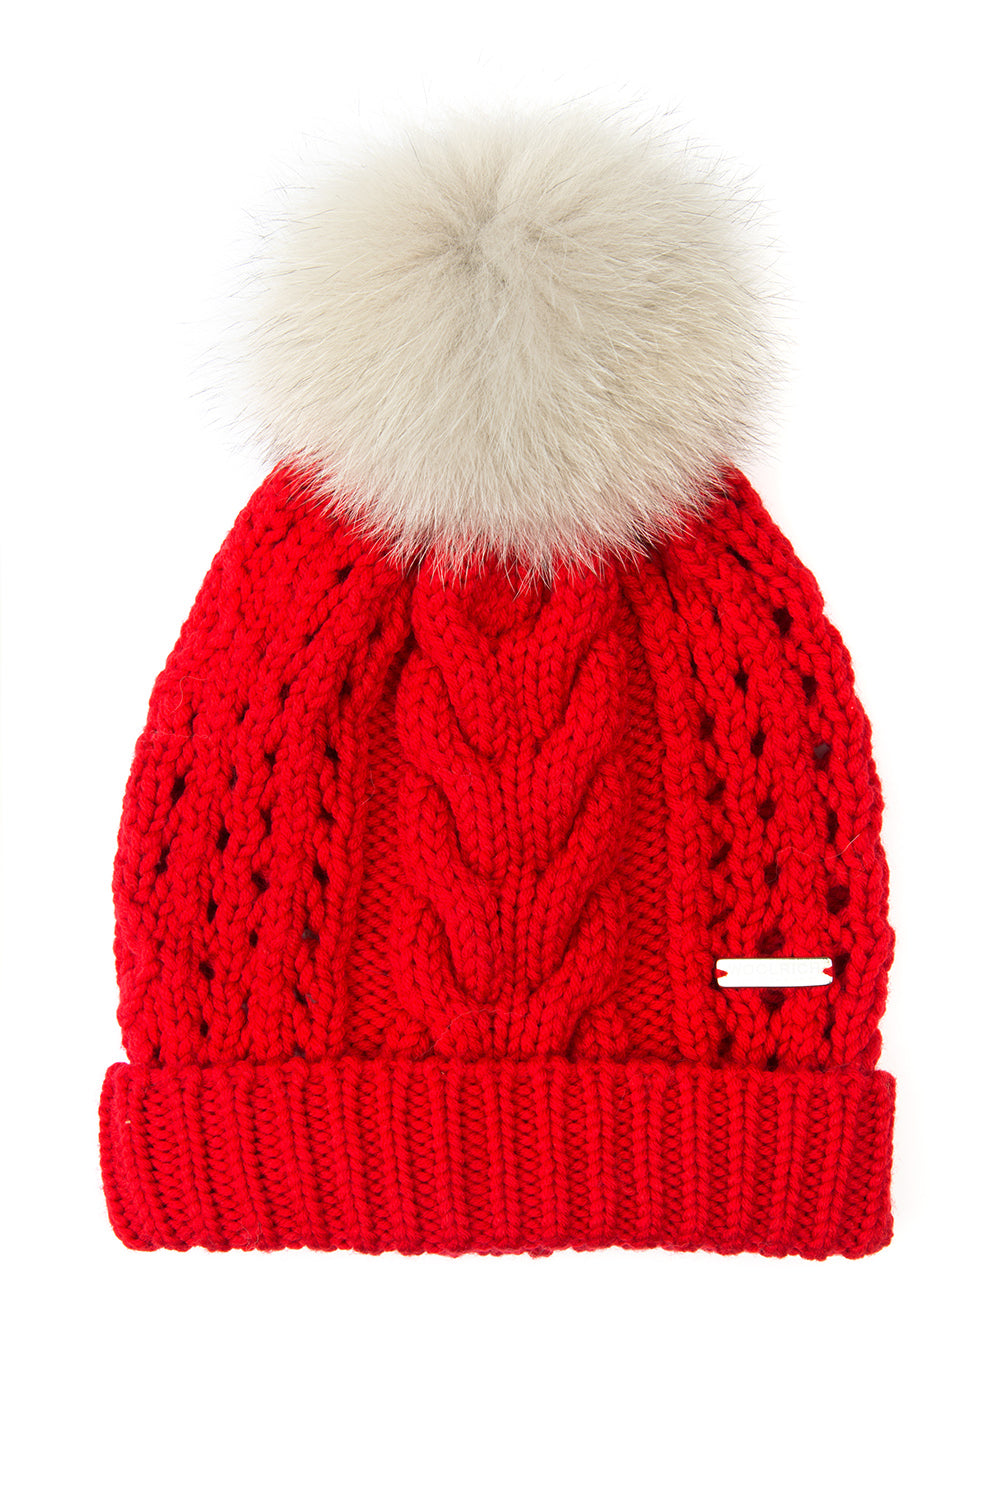 Woolrich Serenity Ladies Ribbed Bobble Hat Red - Laid Flat Front View